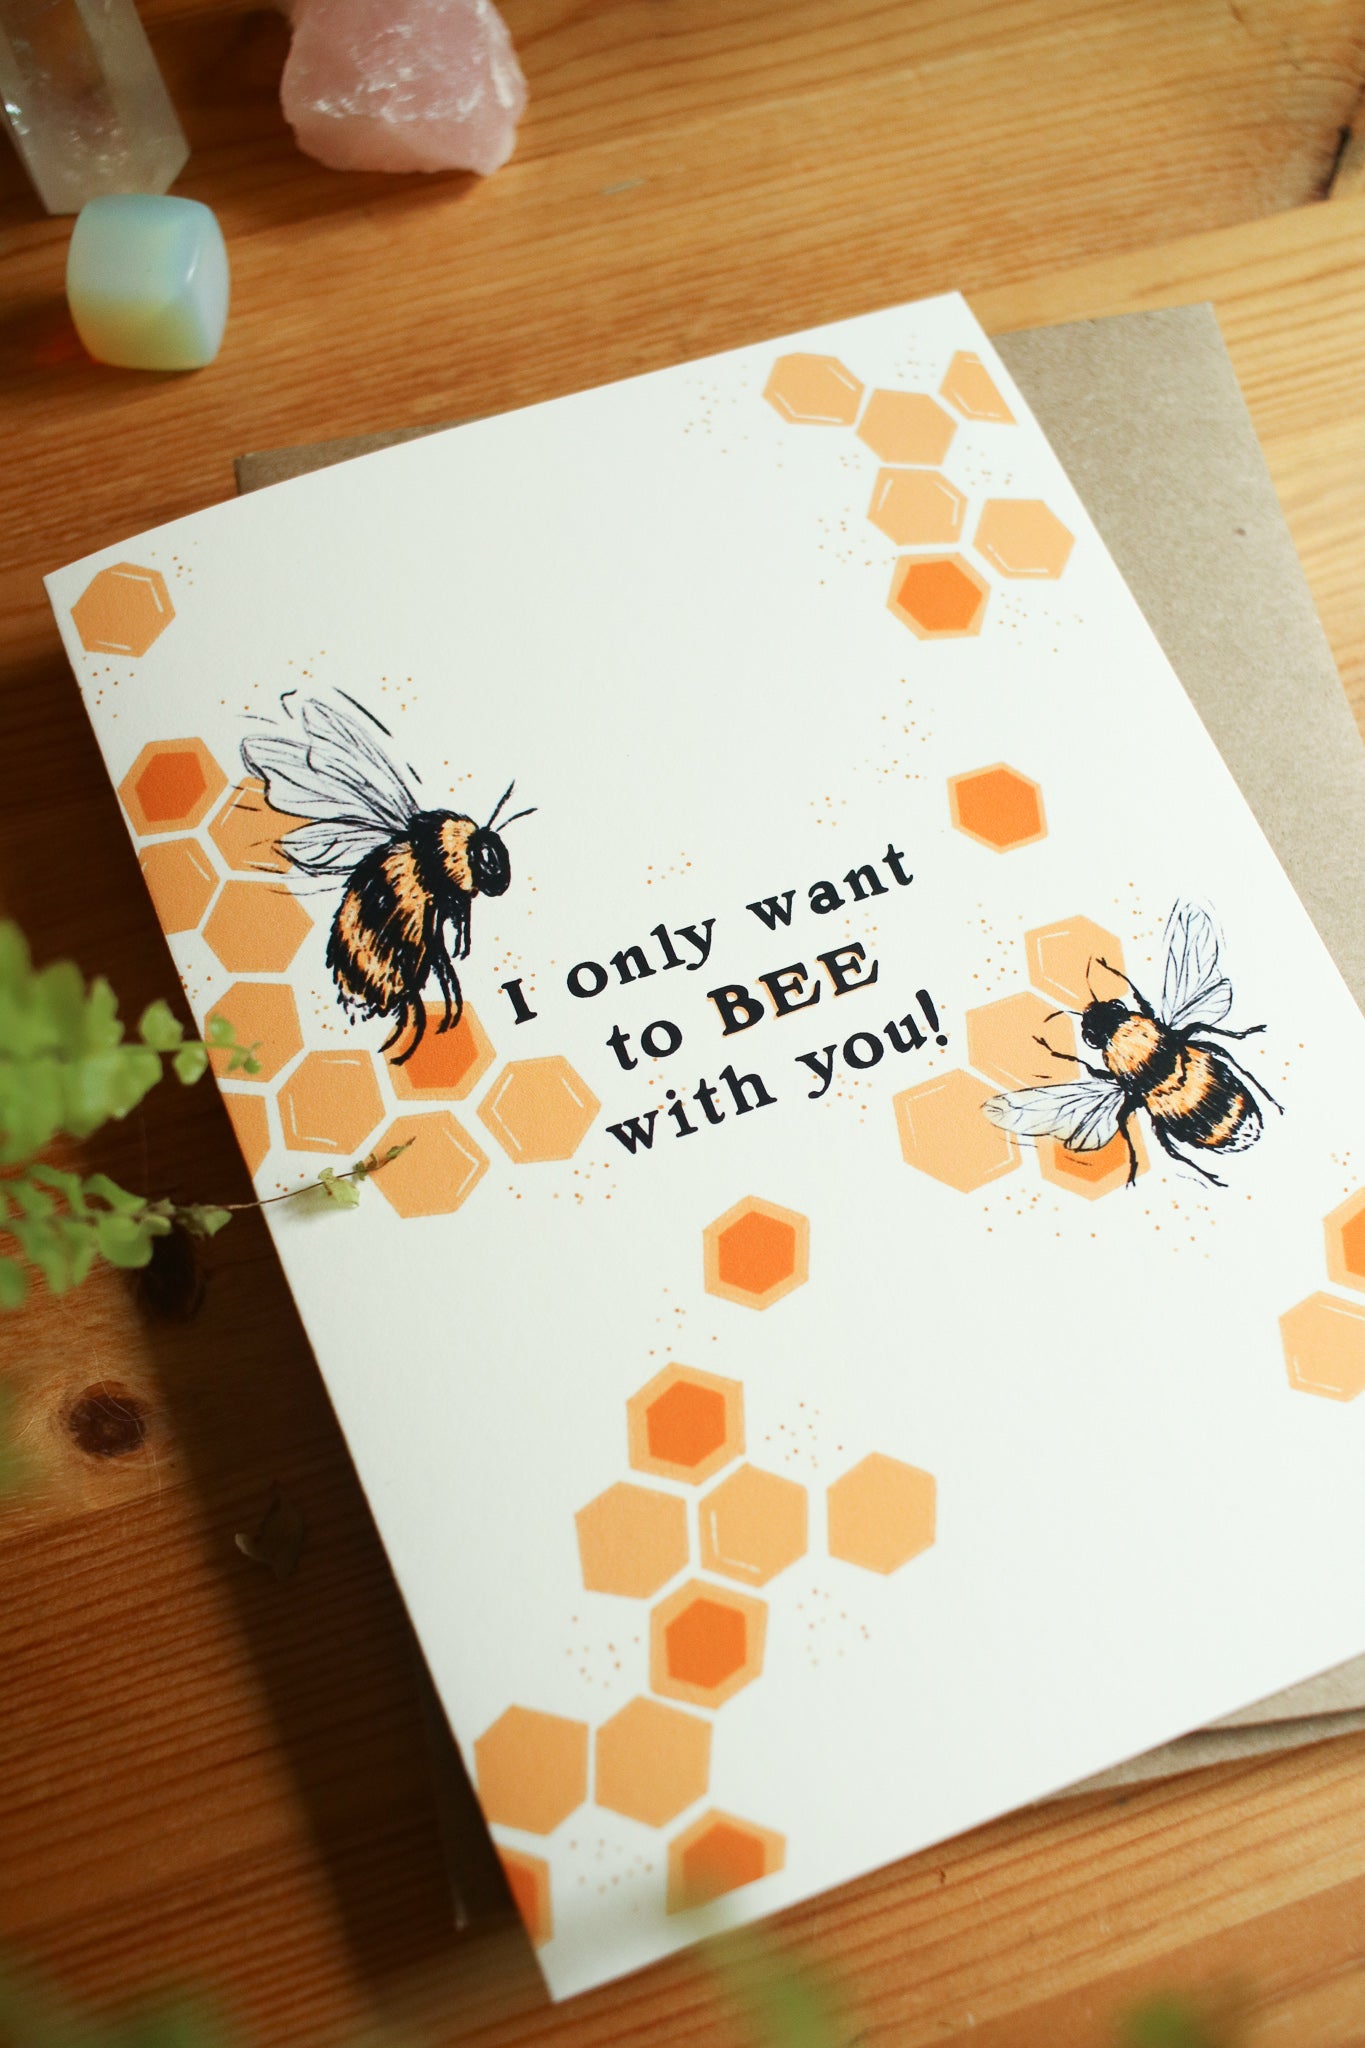 I only want to BEE with you - Greeting Card